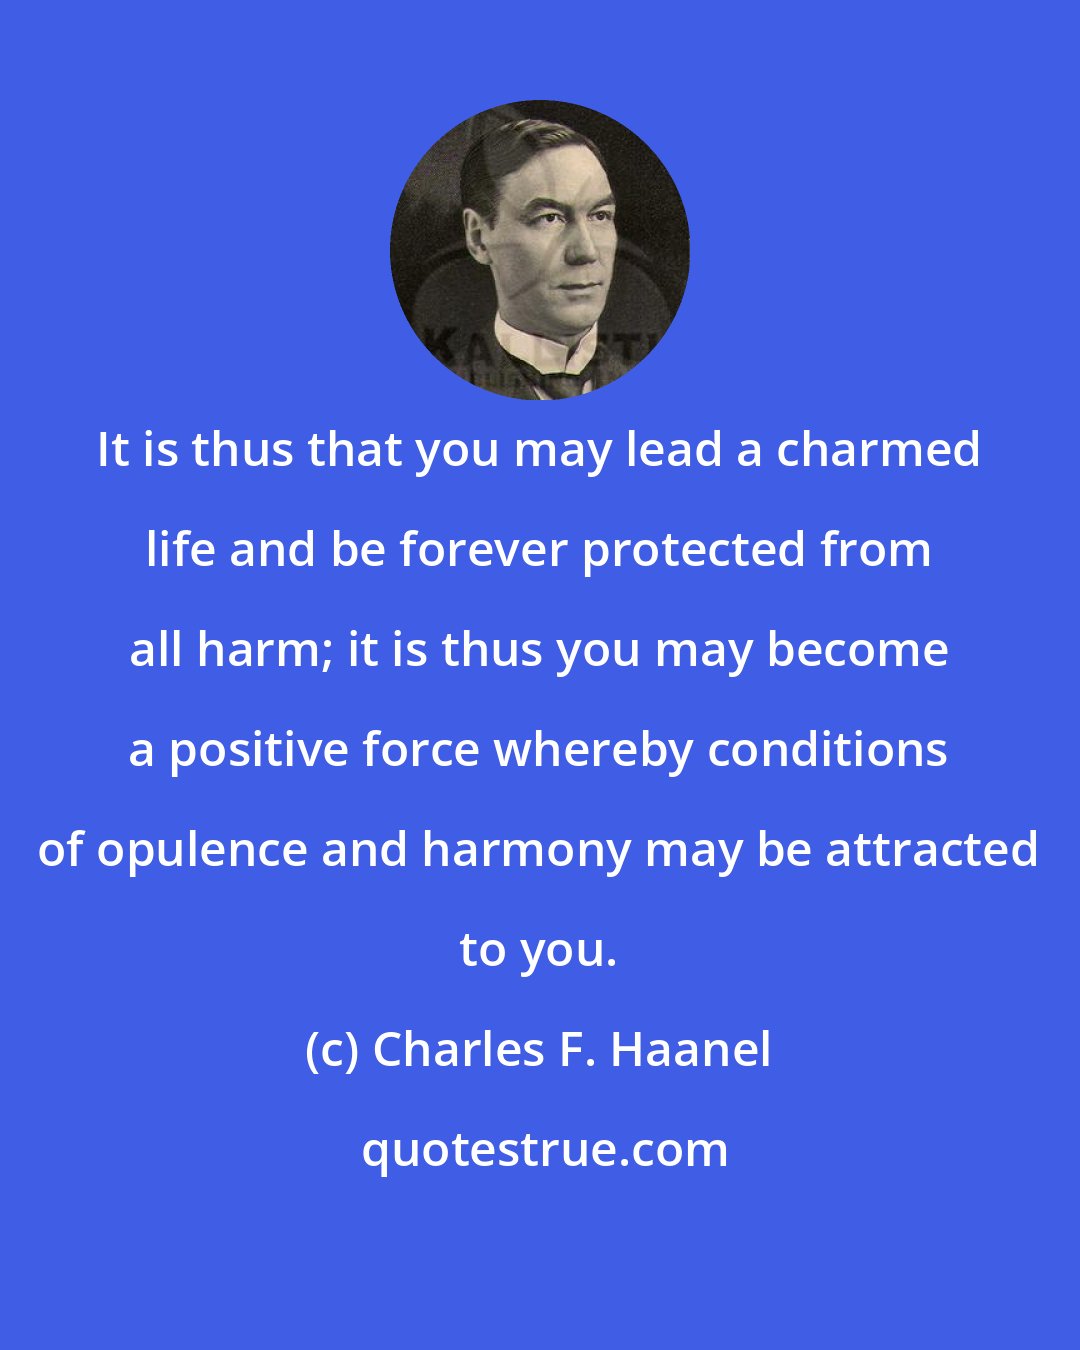 Charles F. Haanel: It is thus that you may lead a charmed life and be forever protected from all harm; it is thus you may become a positive force whereby conditions of opulence and harmony may be attracted to you.